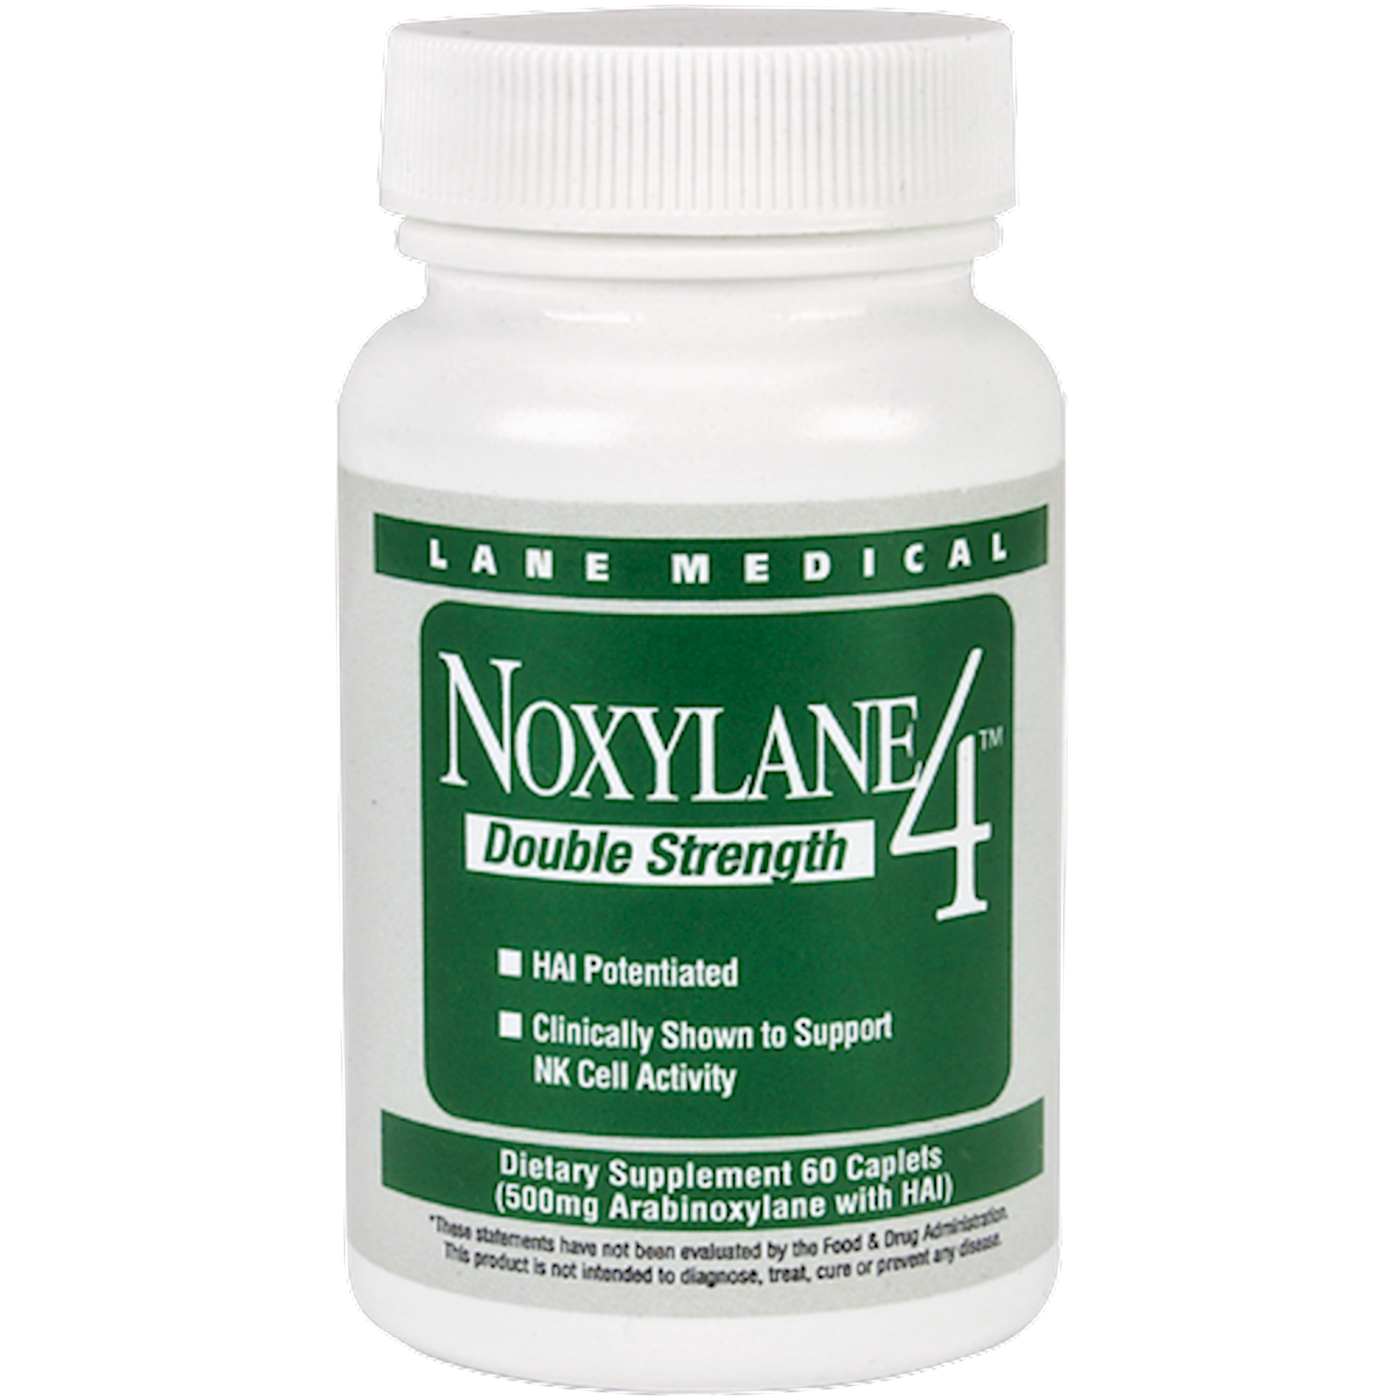 Noxylane4 Double Strength 60 cplts Curated Wellness